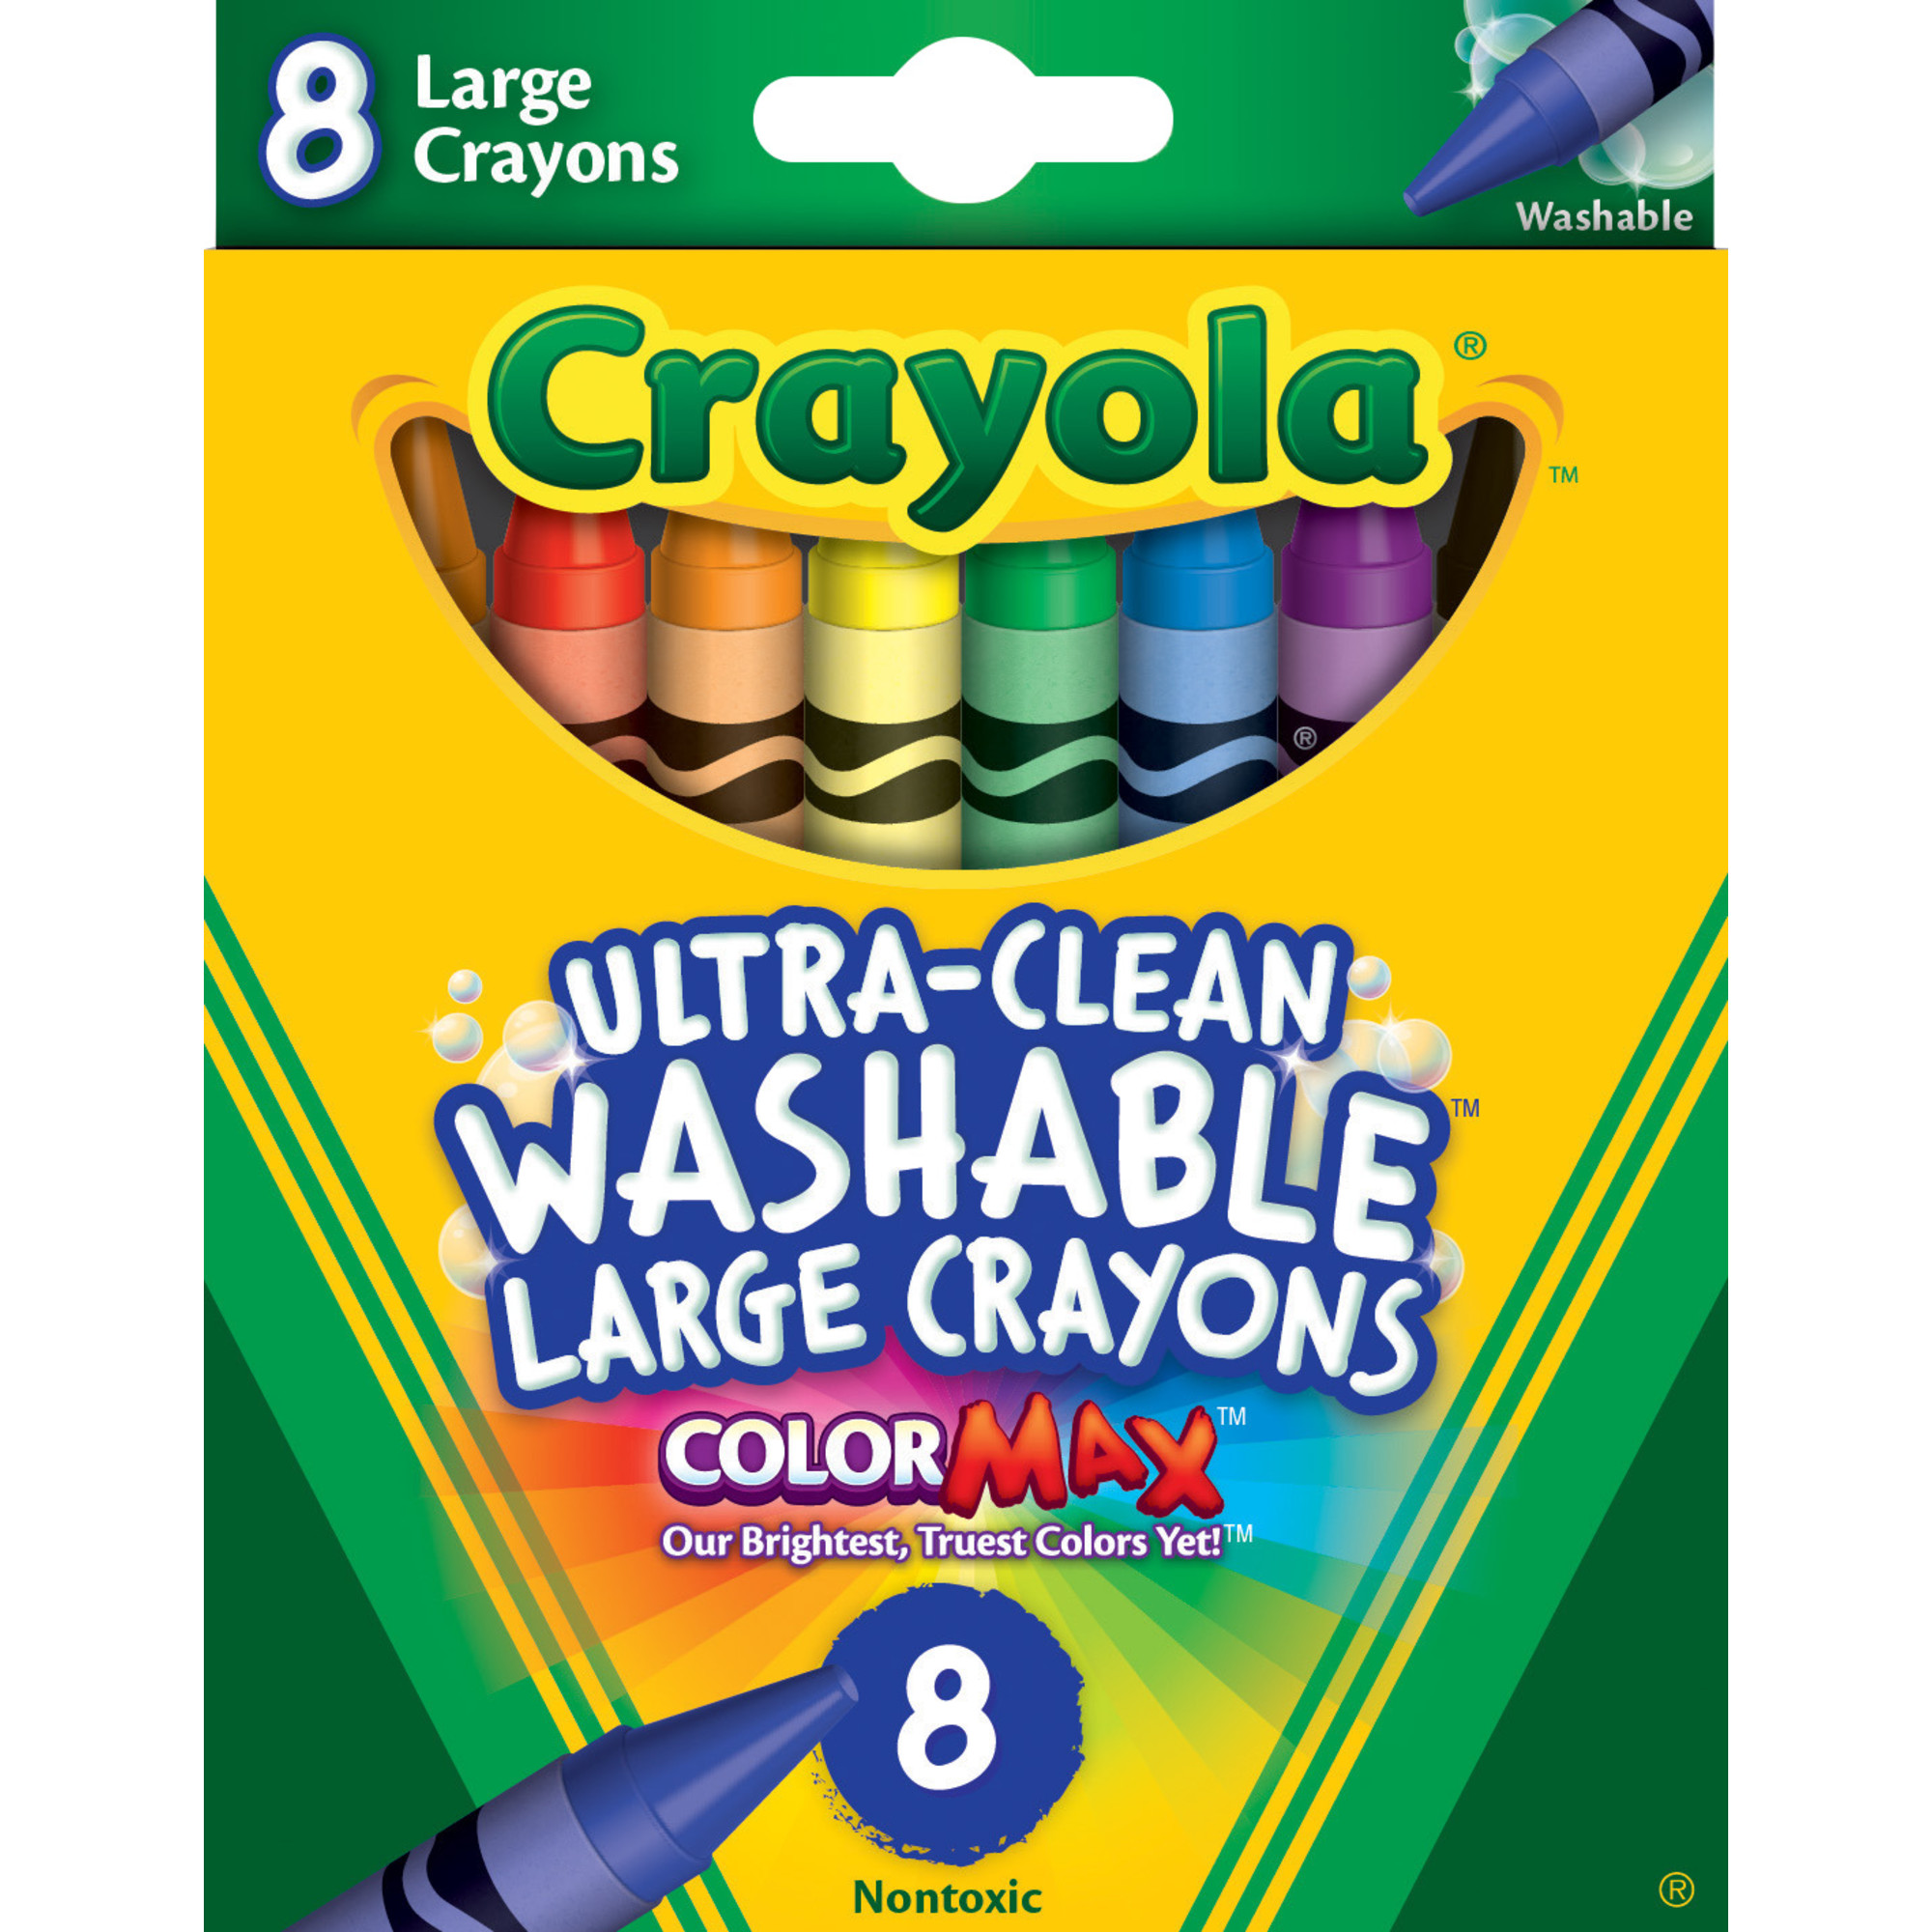 Crayola Ultra Clean Washable Color Max Crayons, Large Size, Set of 8, Multi-Color - image 1 of 6